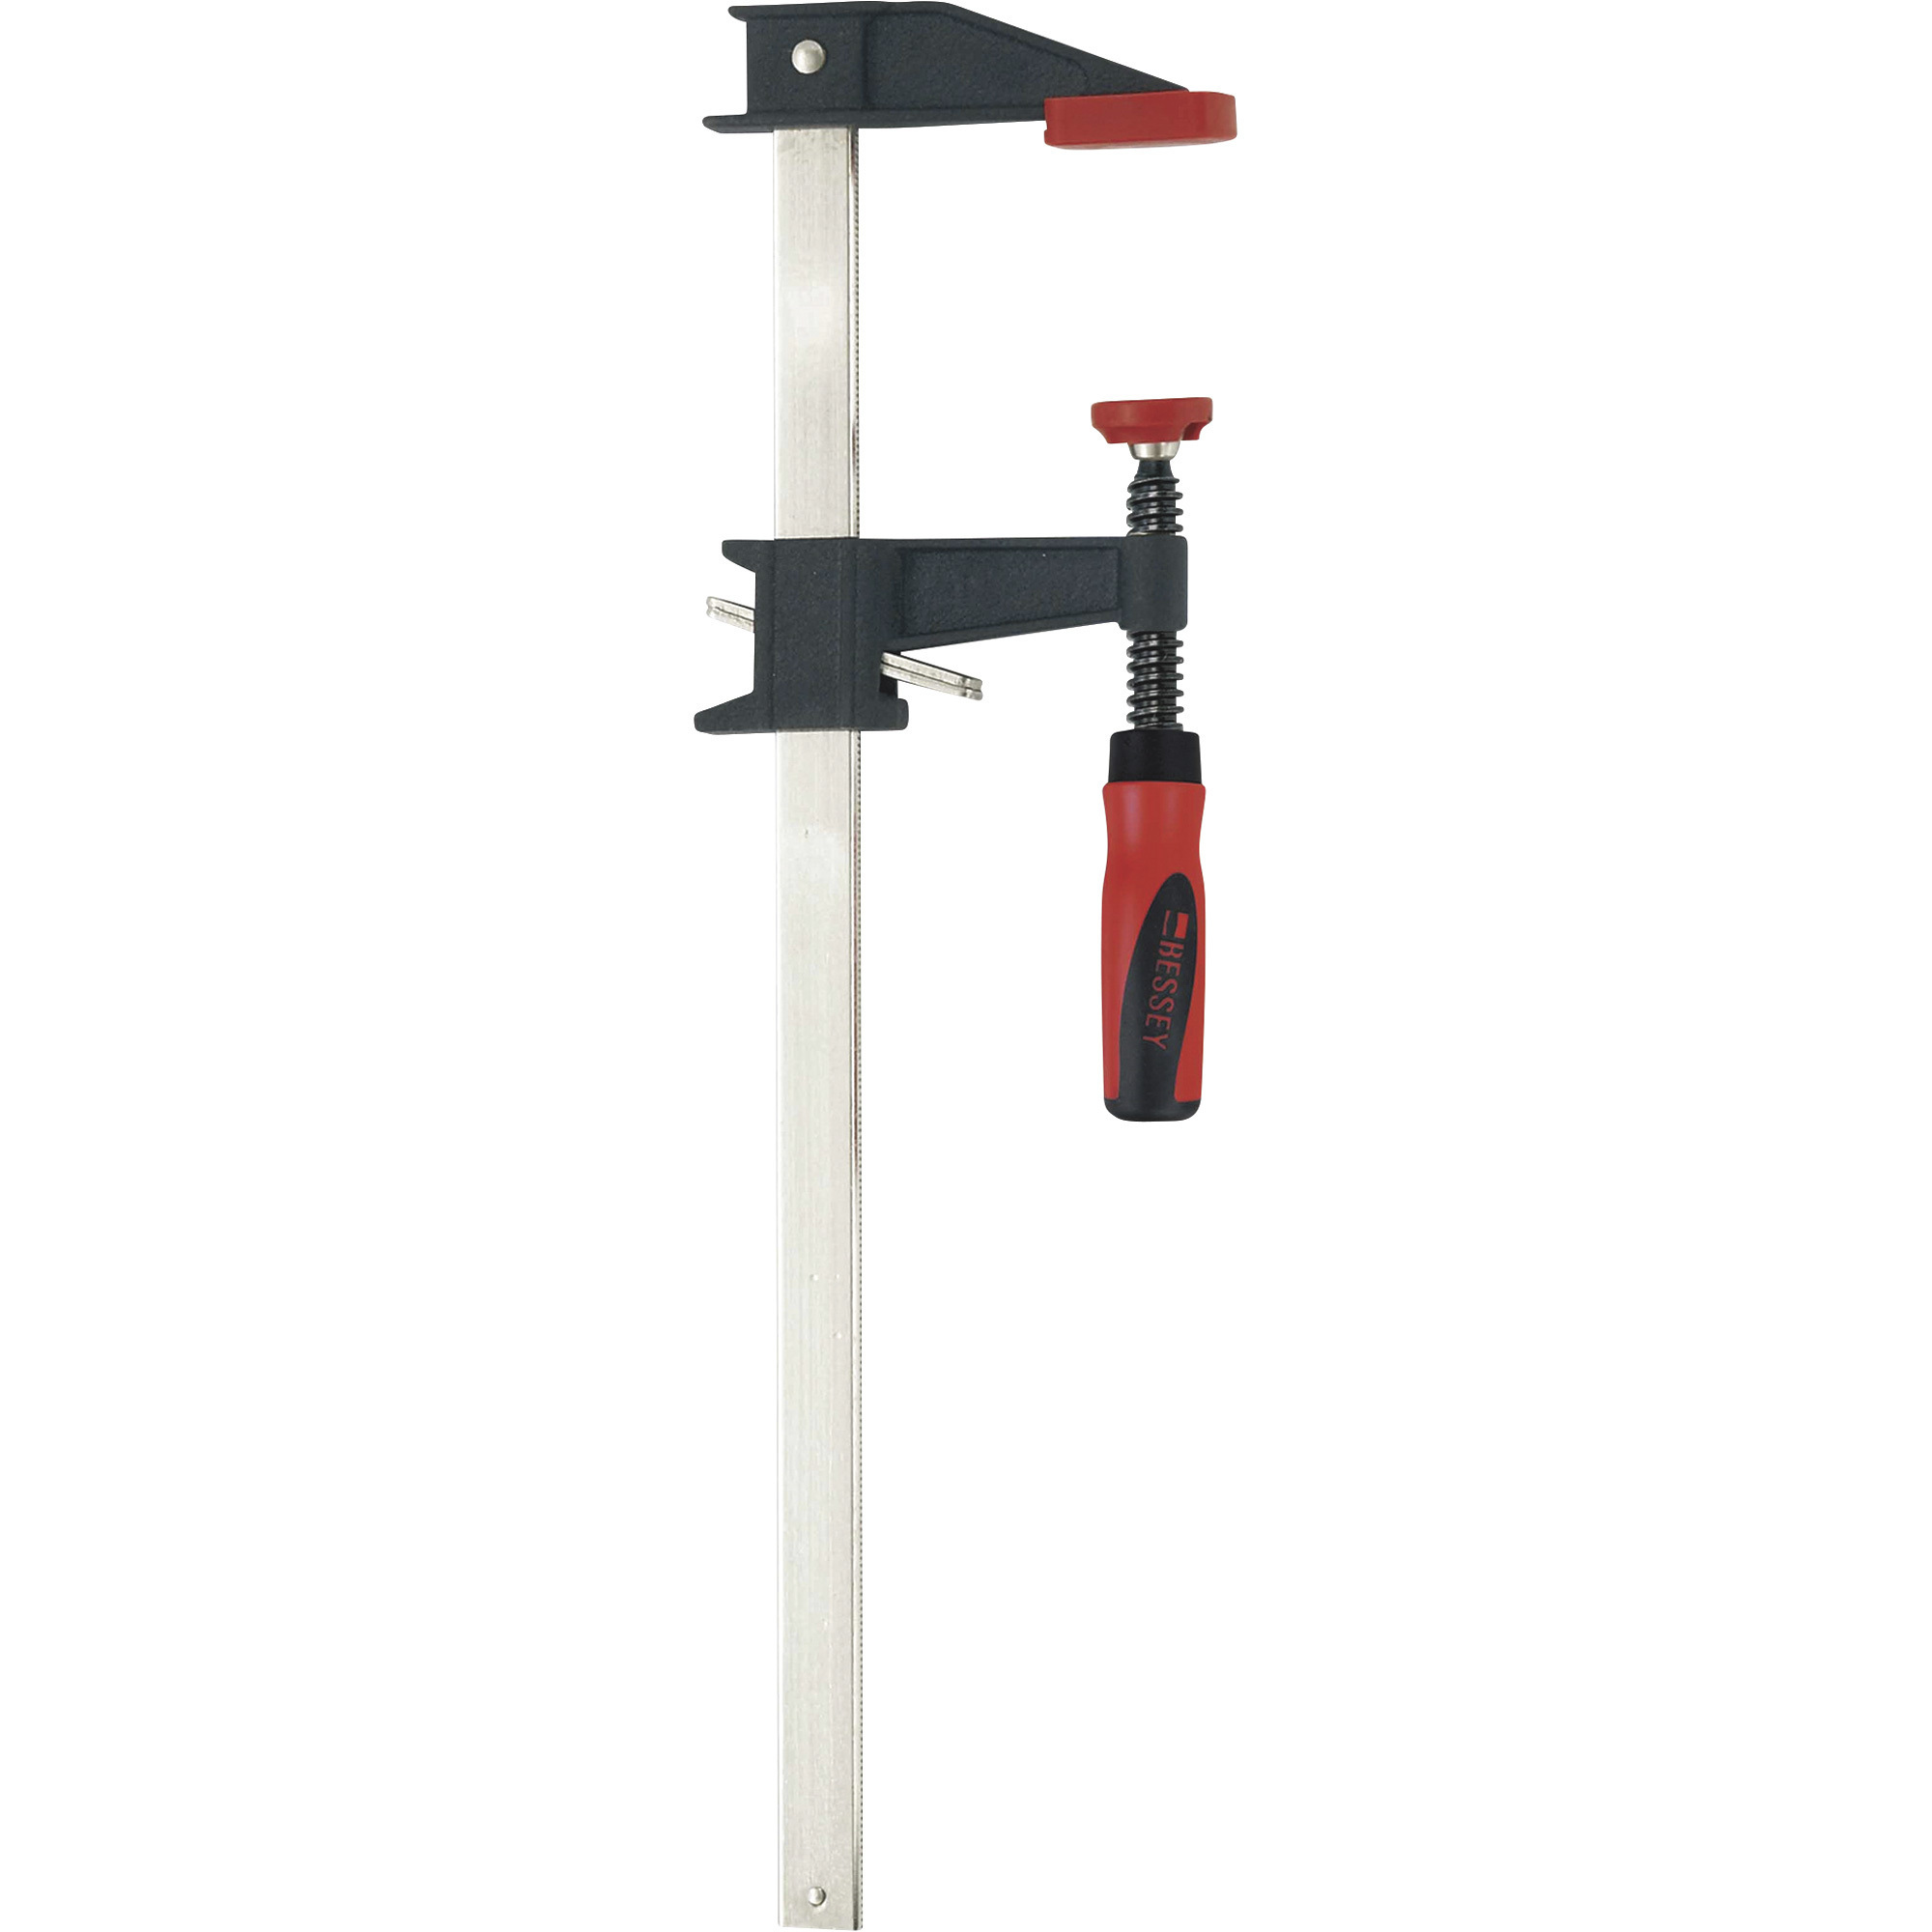 Bessey 18Inch Clutch Style Bar Clamp, 1,100-Lb. Clamping Pressure, 3 1/2Inch Throat Depth, Model GSCC3.518+2K